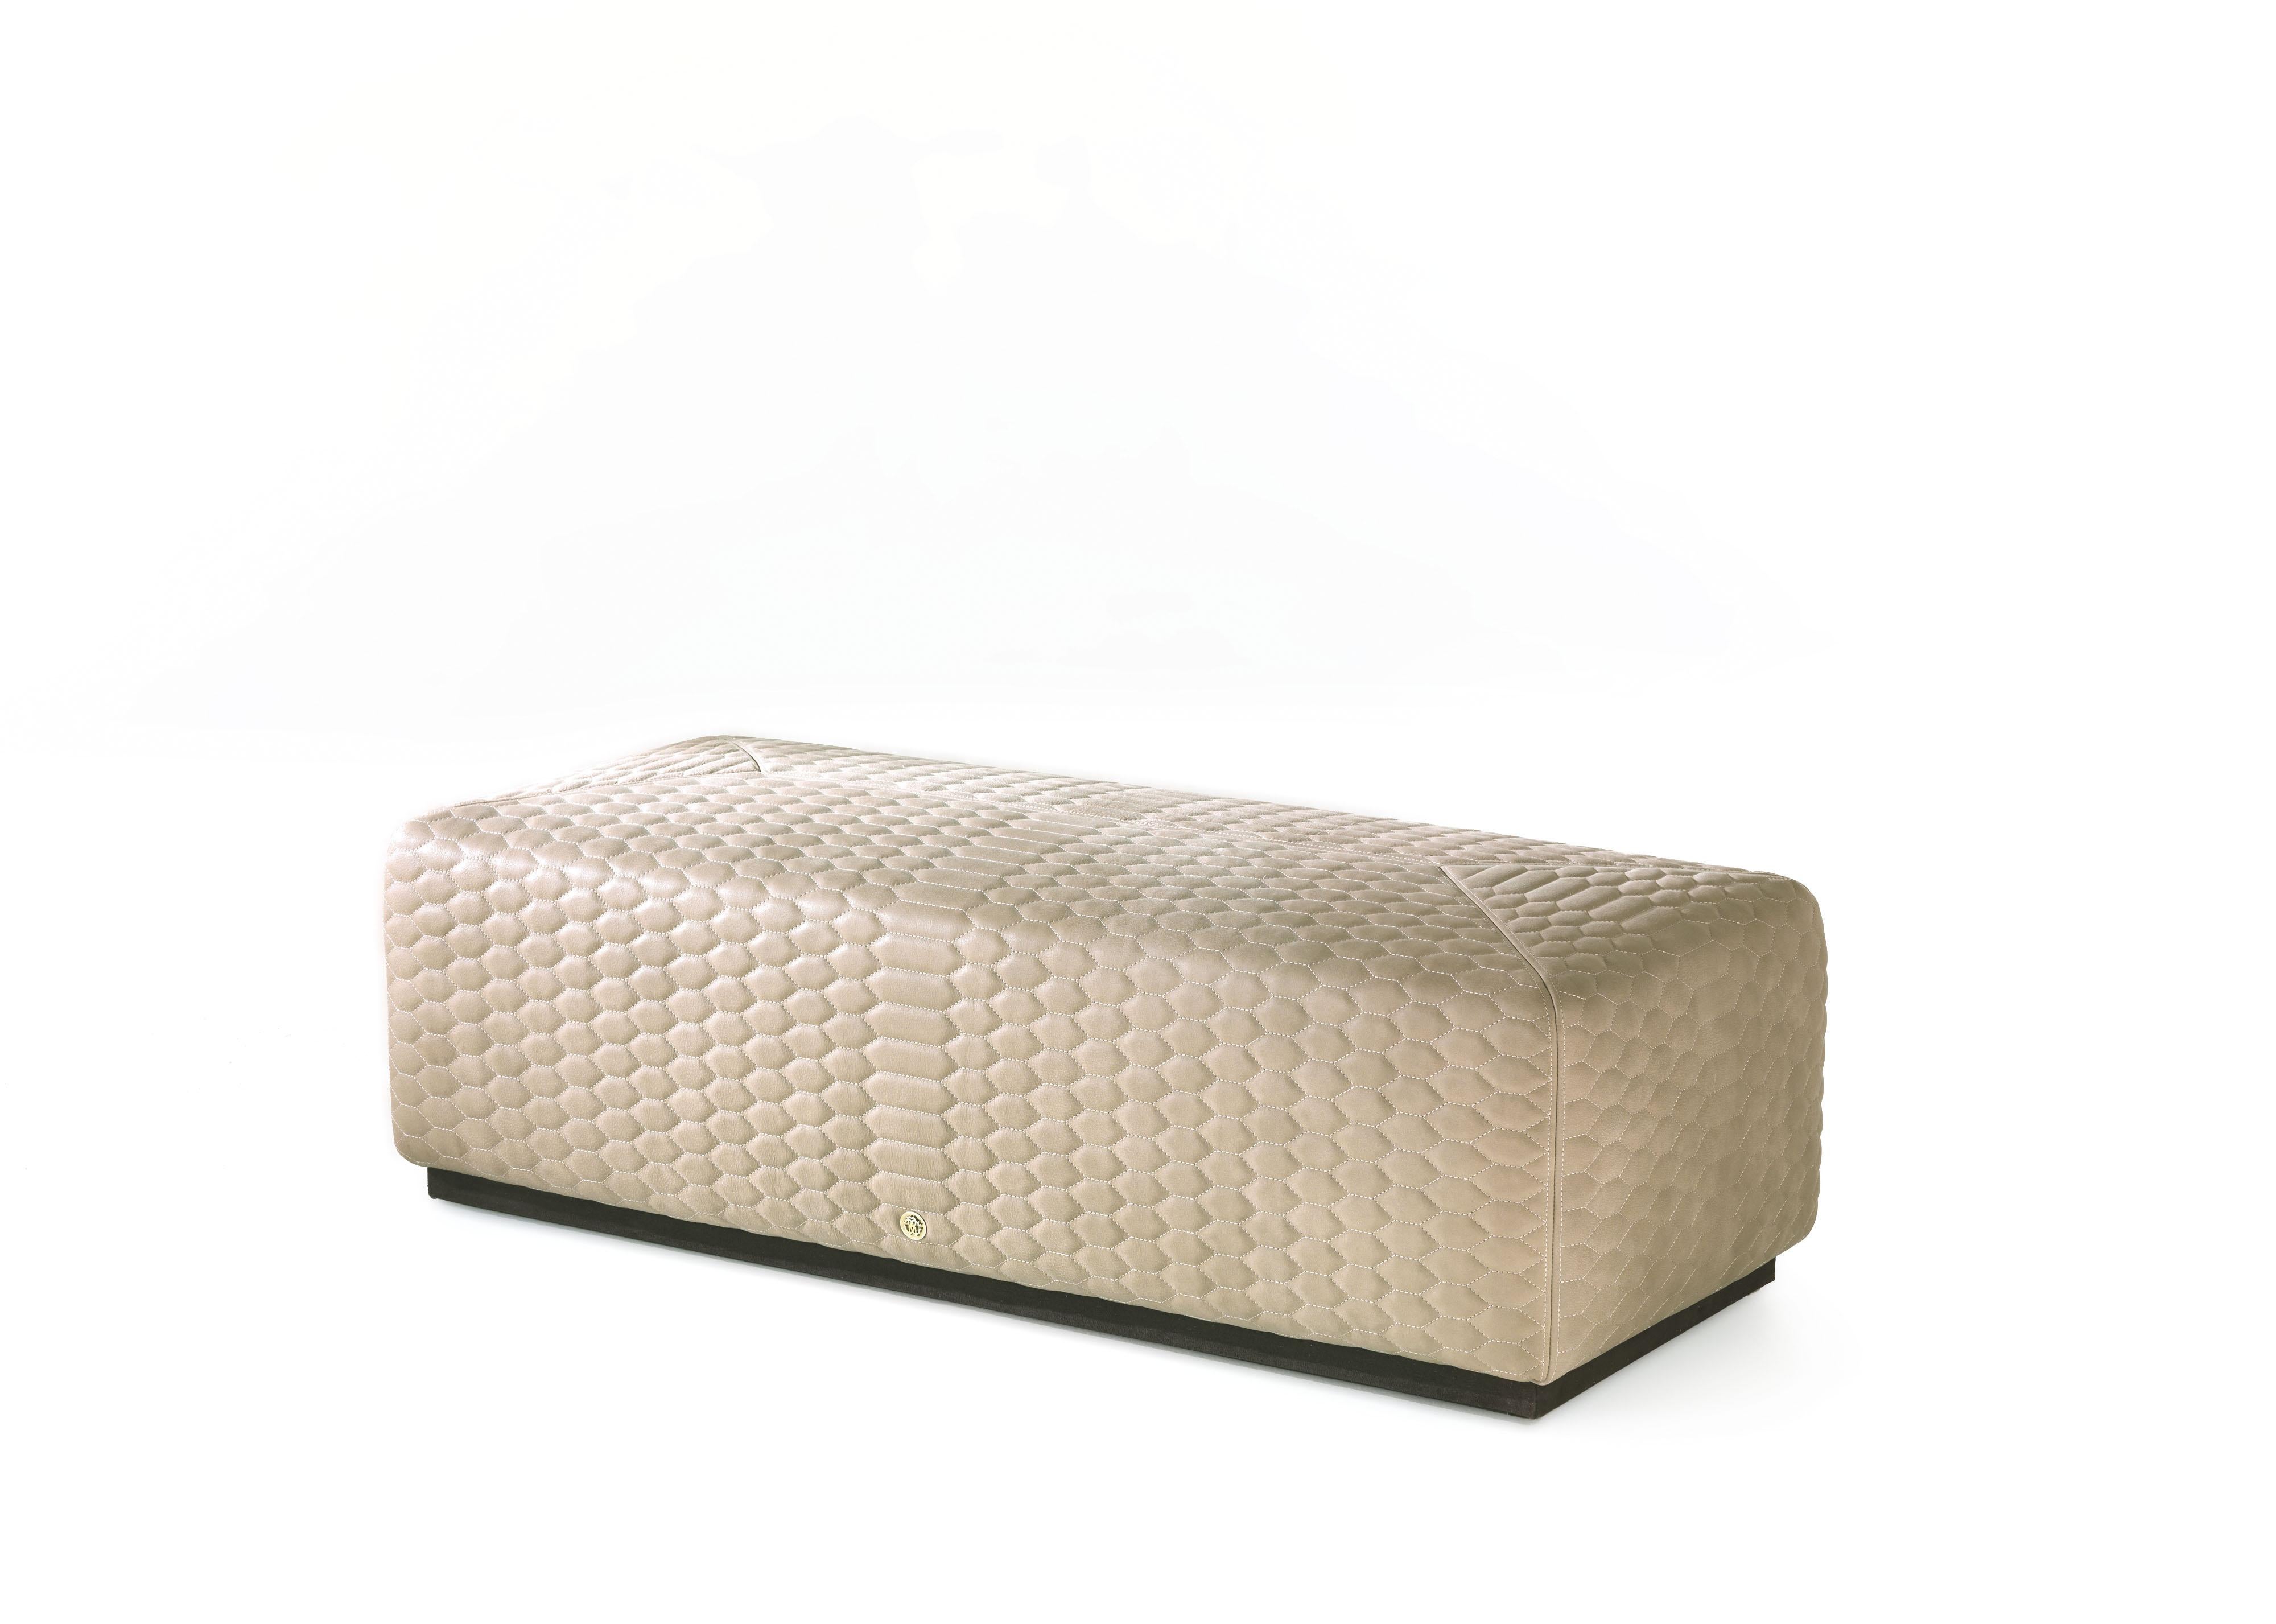 Elegant and modern lines for the Hera pouf upholstered with precious Charlize silk printed with typical Roberto Cavalli patterns.
Hera Pouf structure in poplar wood and foam. Upholstery in hexagonal quilted leather CAT. A Sauvage COL. Ghiaia.